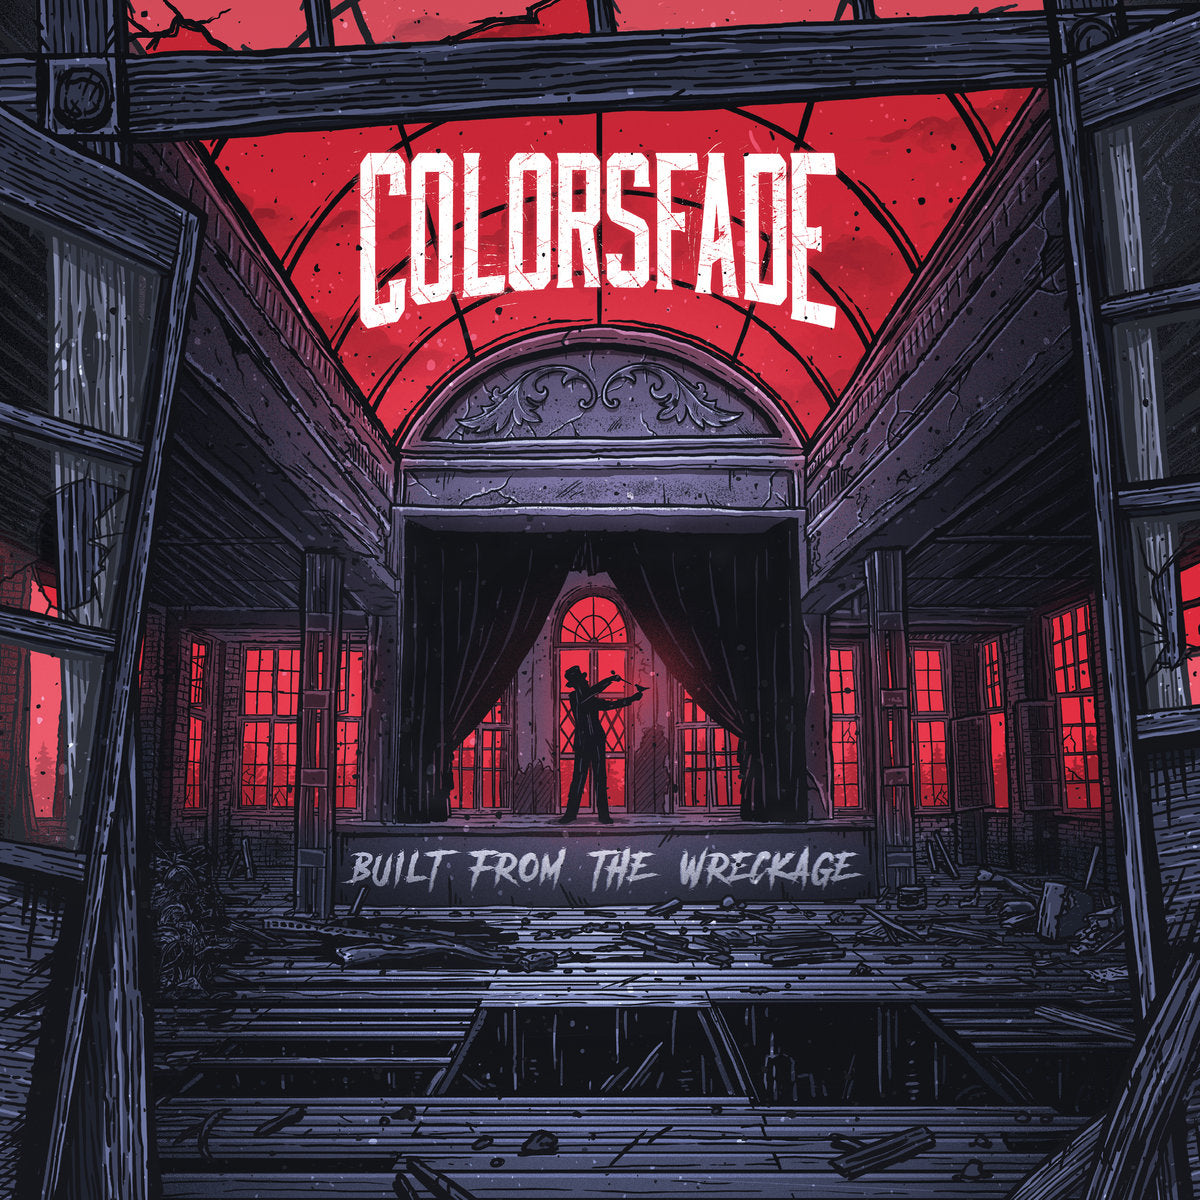 COLORSFADE - "Built From The Wreckage" (CD)